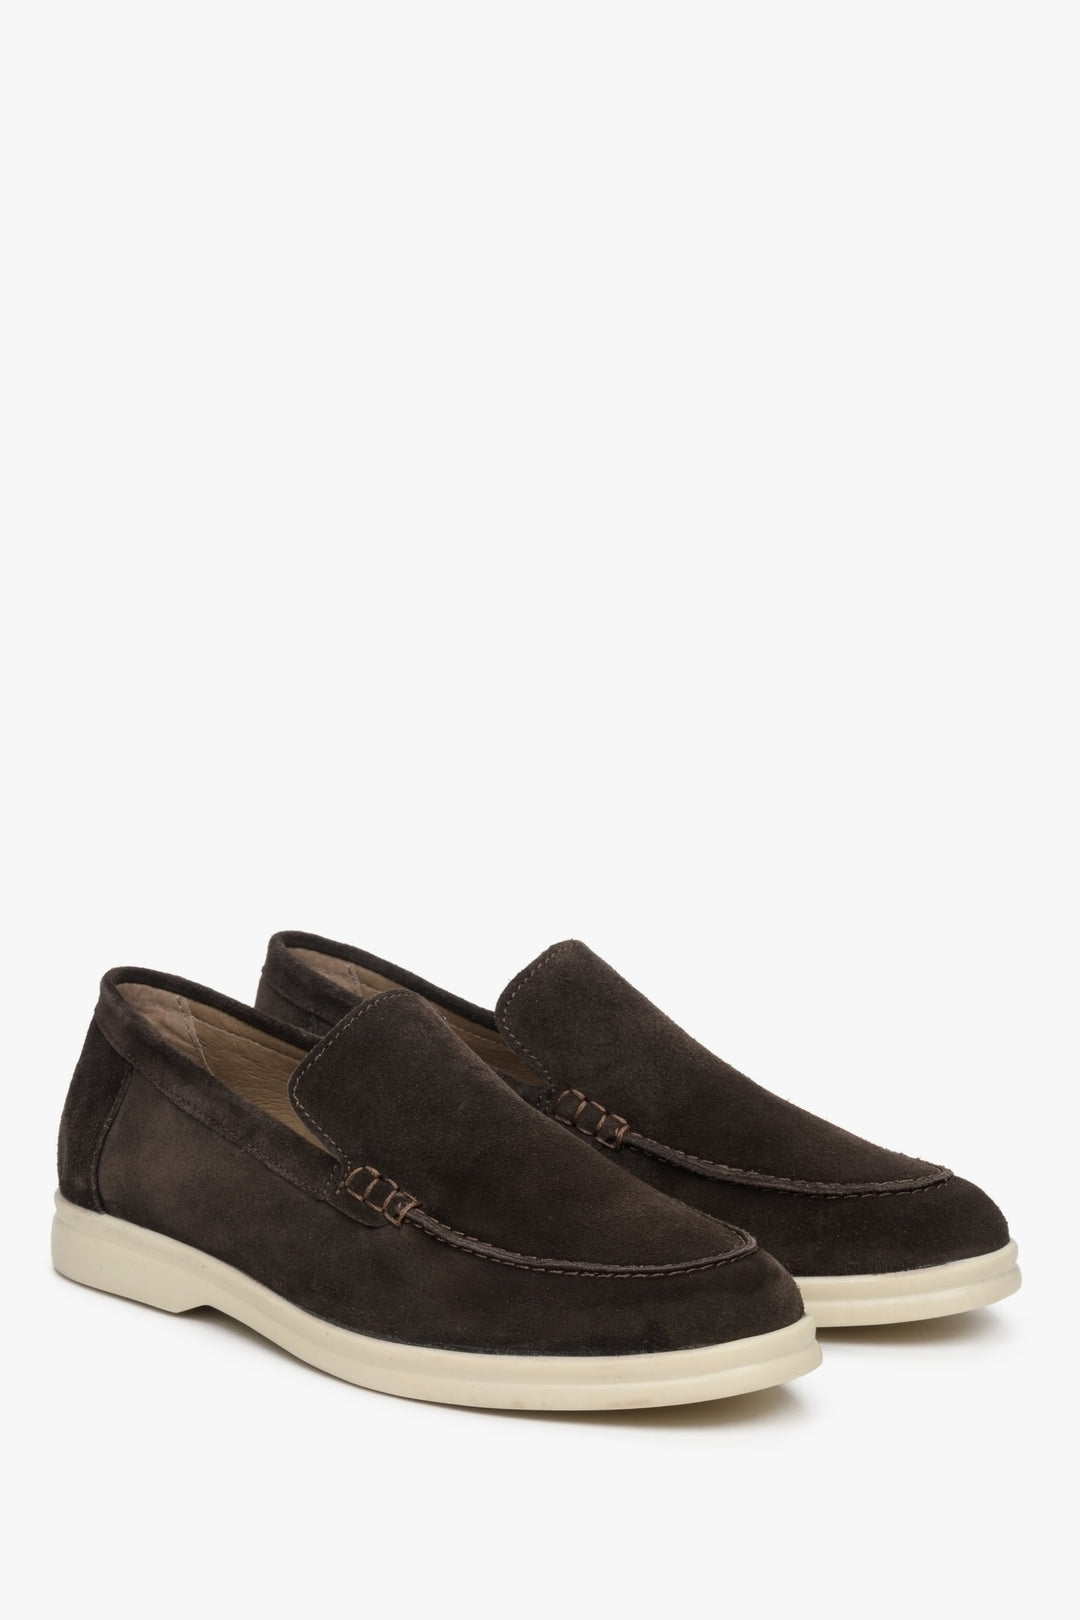 Women's suede loafers in saddle brown Estro - presentation of the sideline and white sole.